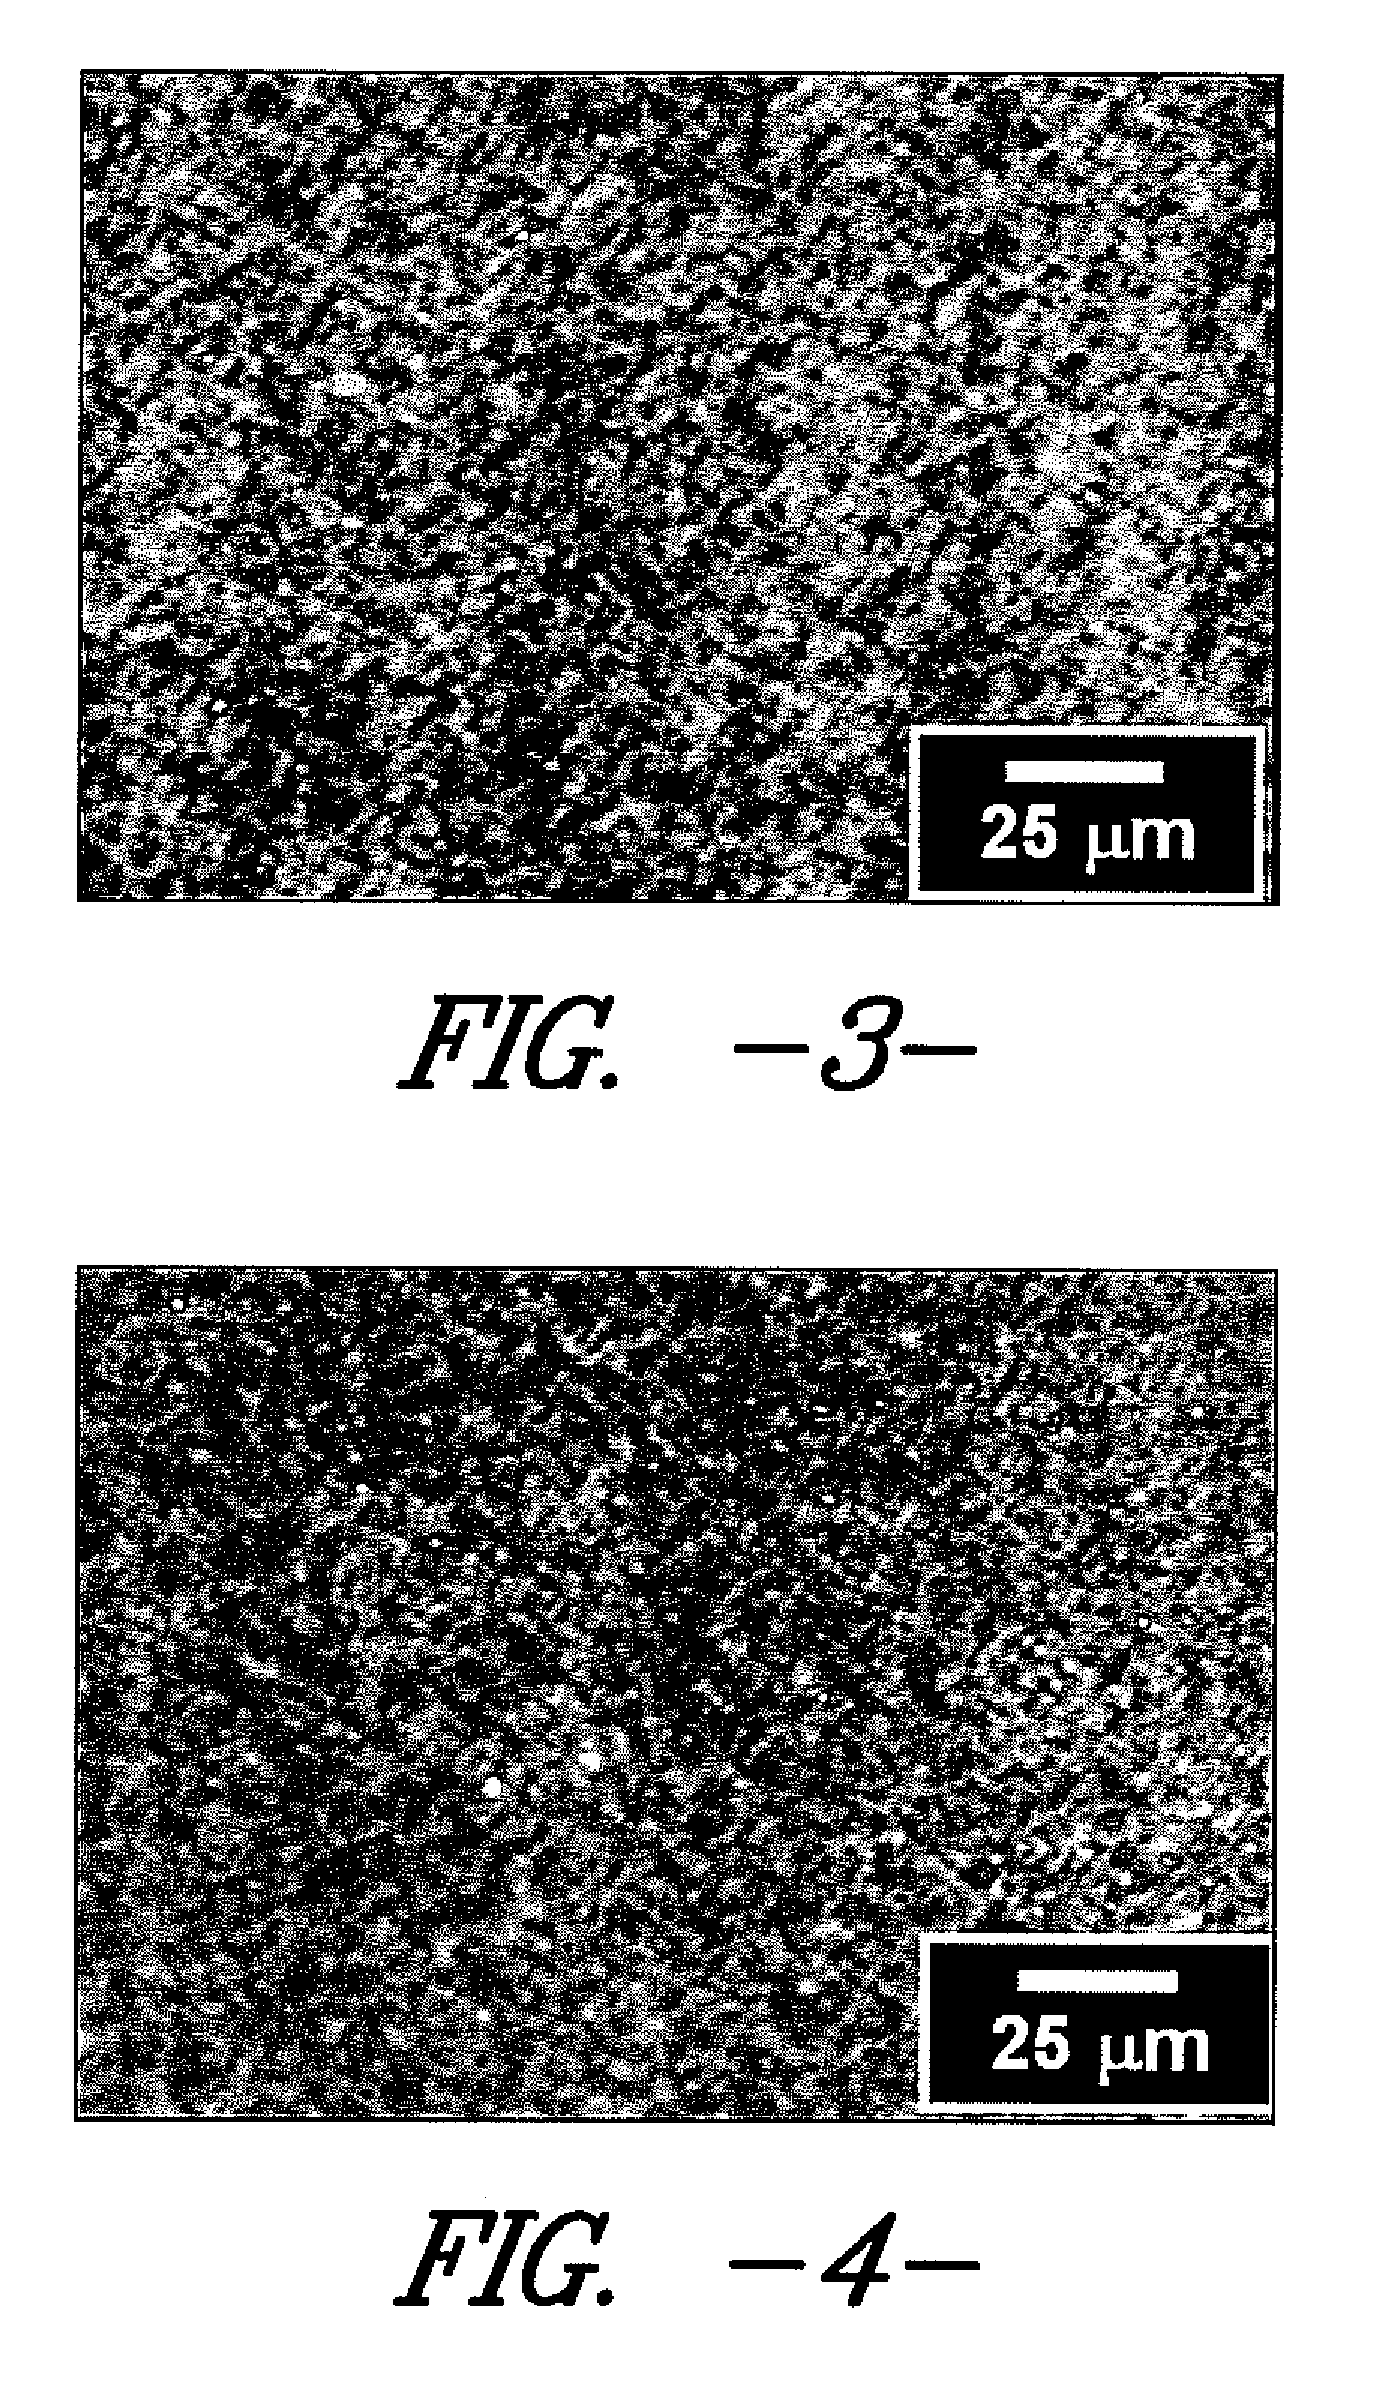 Polymer compositions comprising nucleating or clarifying agents and articles made using such compositions